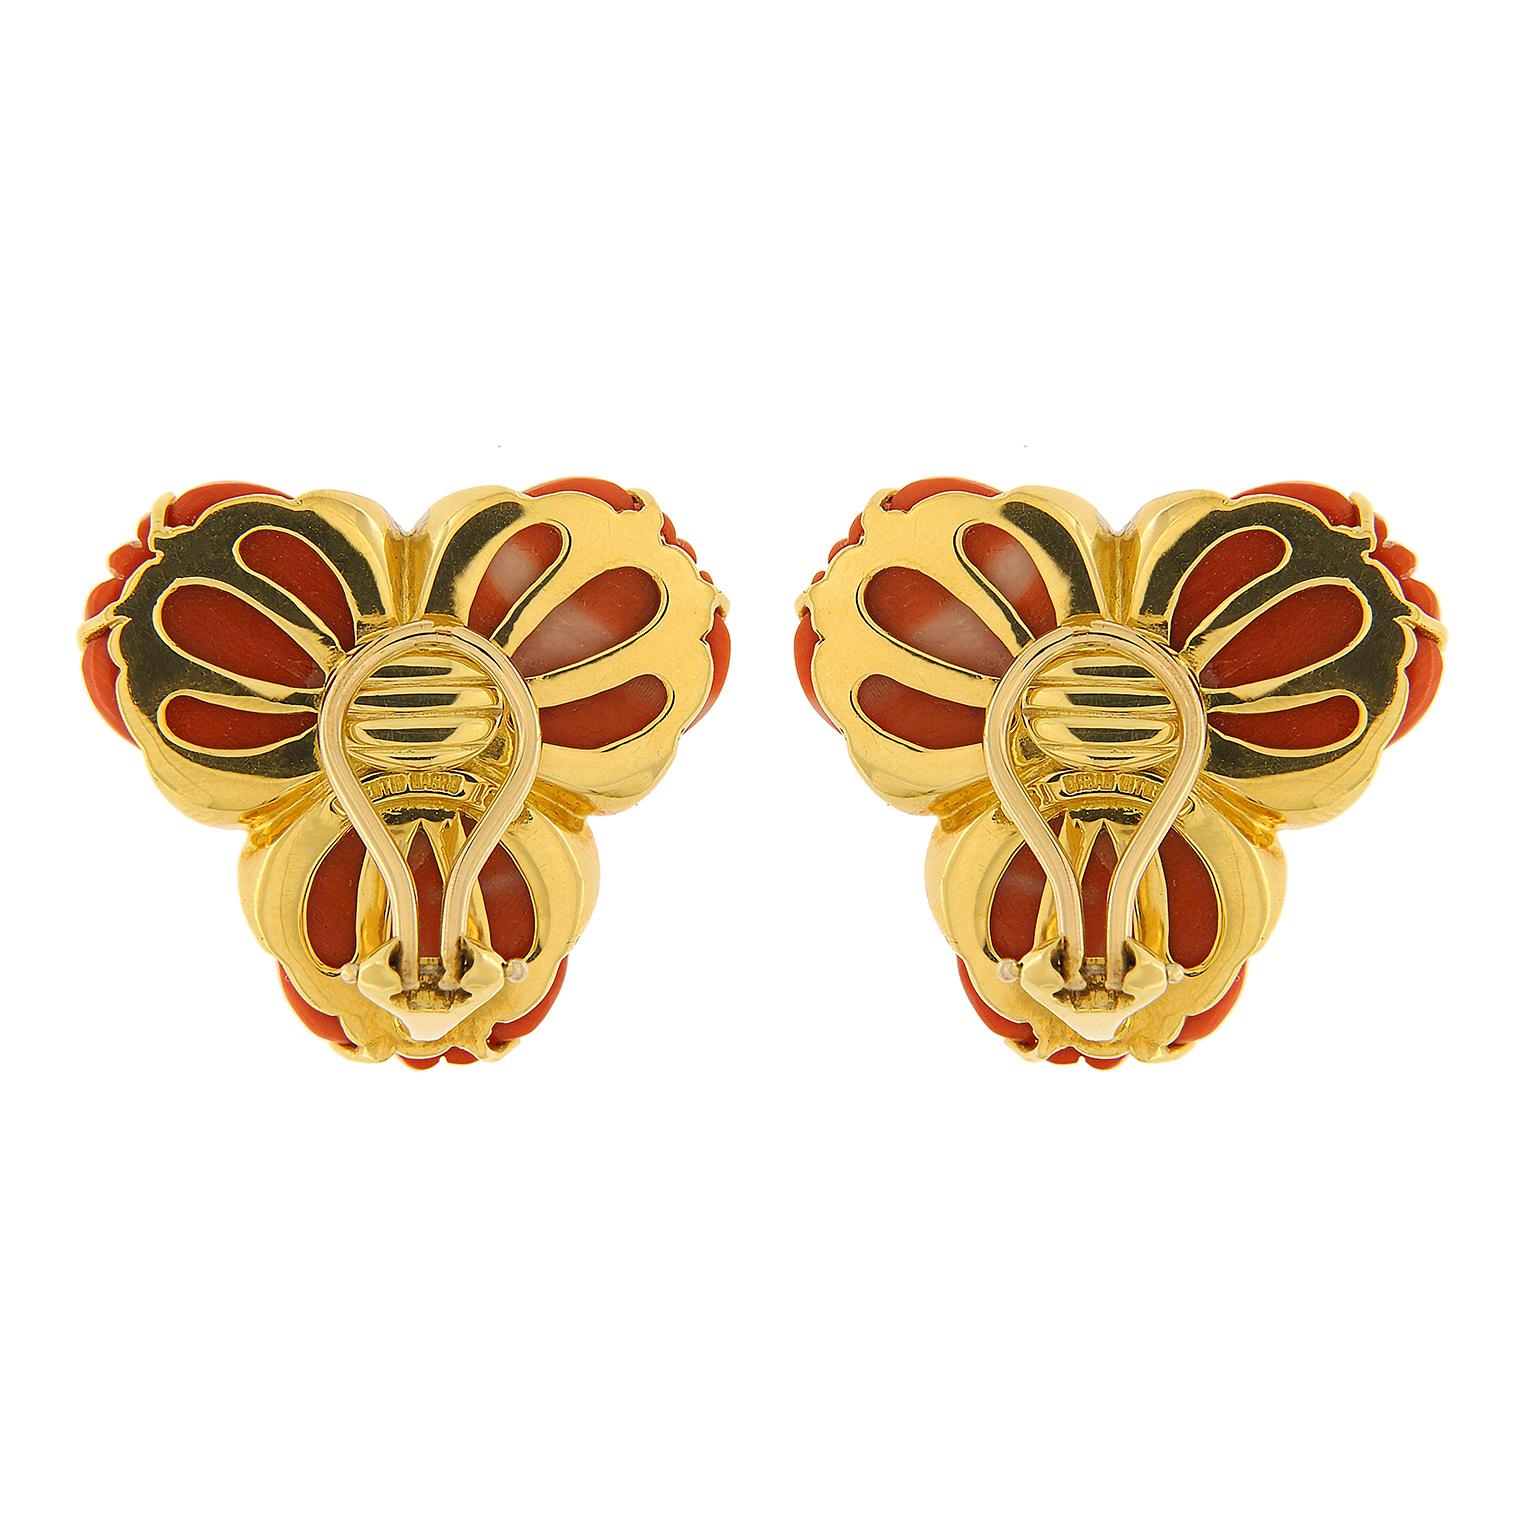 Valentin Magro Dark Red Coral Diamond Triple Fan Earrings turn the ocean into wearable art. Precious coral carved into fluted shapes and set three to an earring, emulating sea fans. Round brilliant cut diamonds pave set in 18k yellow gold wraps